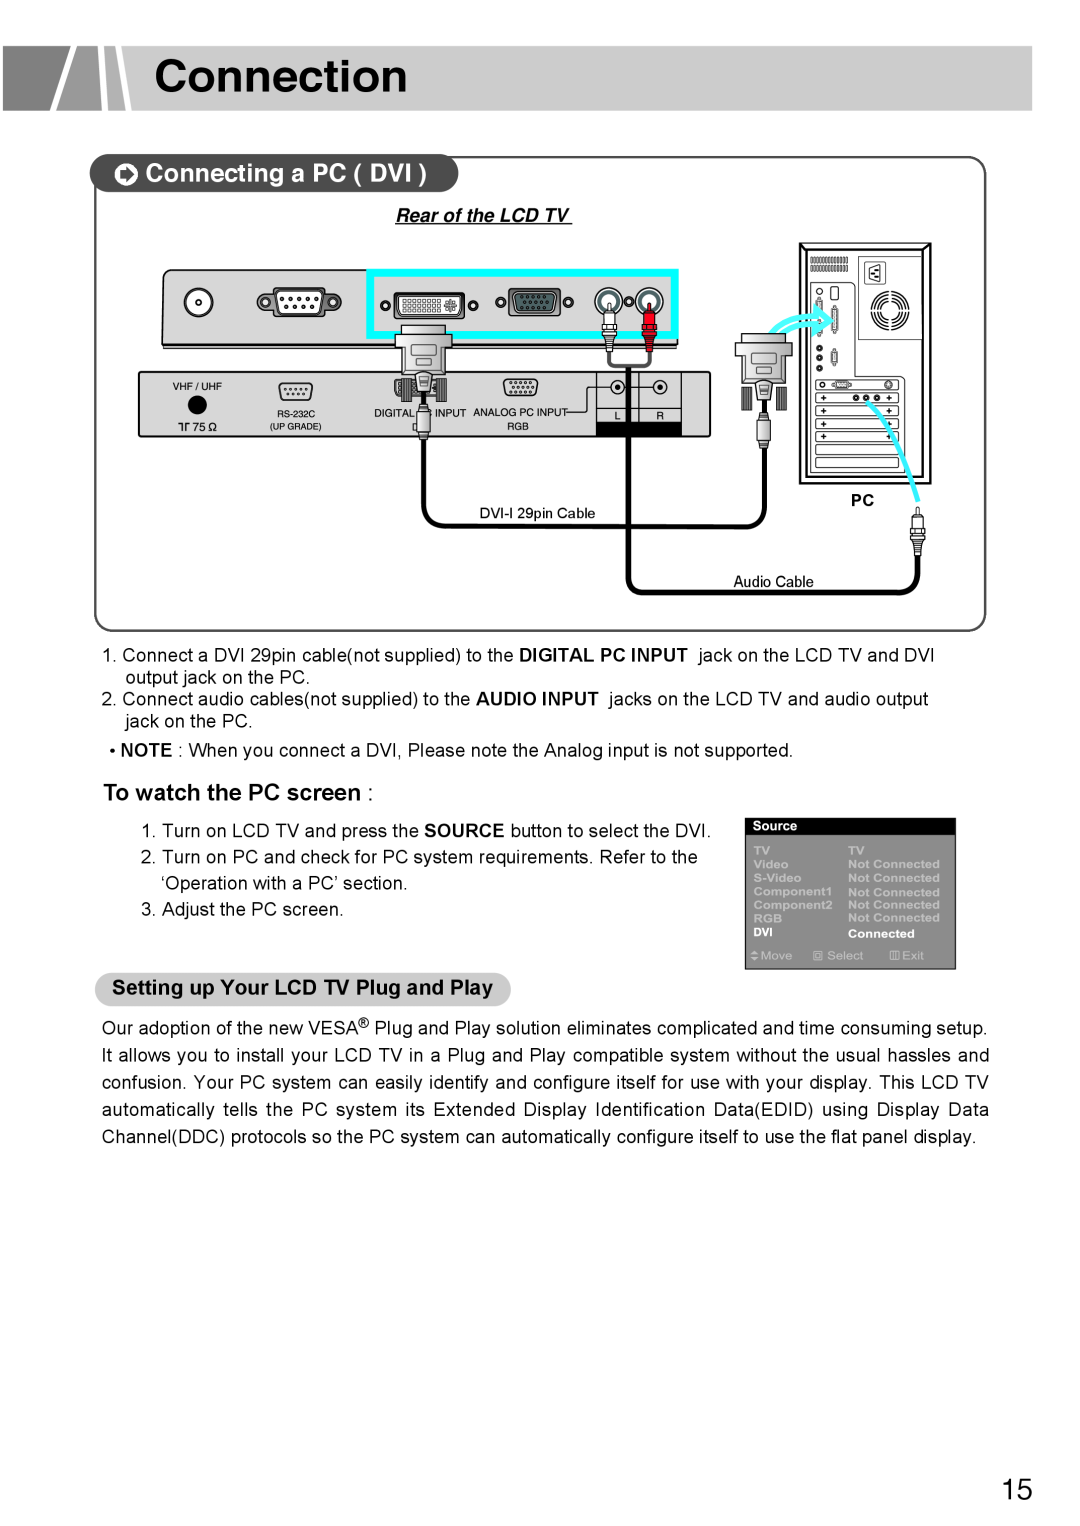 Humax L3040 owner manual Connecting a PC DVI, Connection, To watch the PC screen, Rear of the LCD TV 